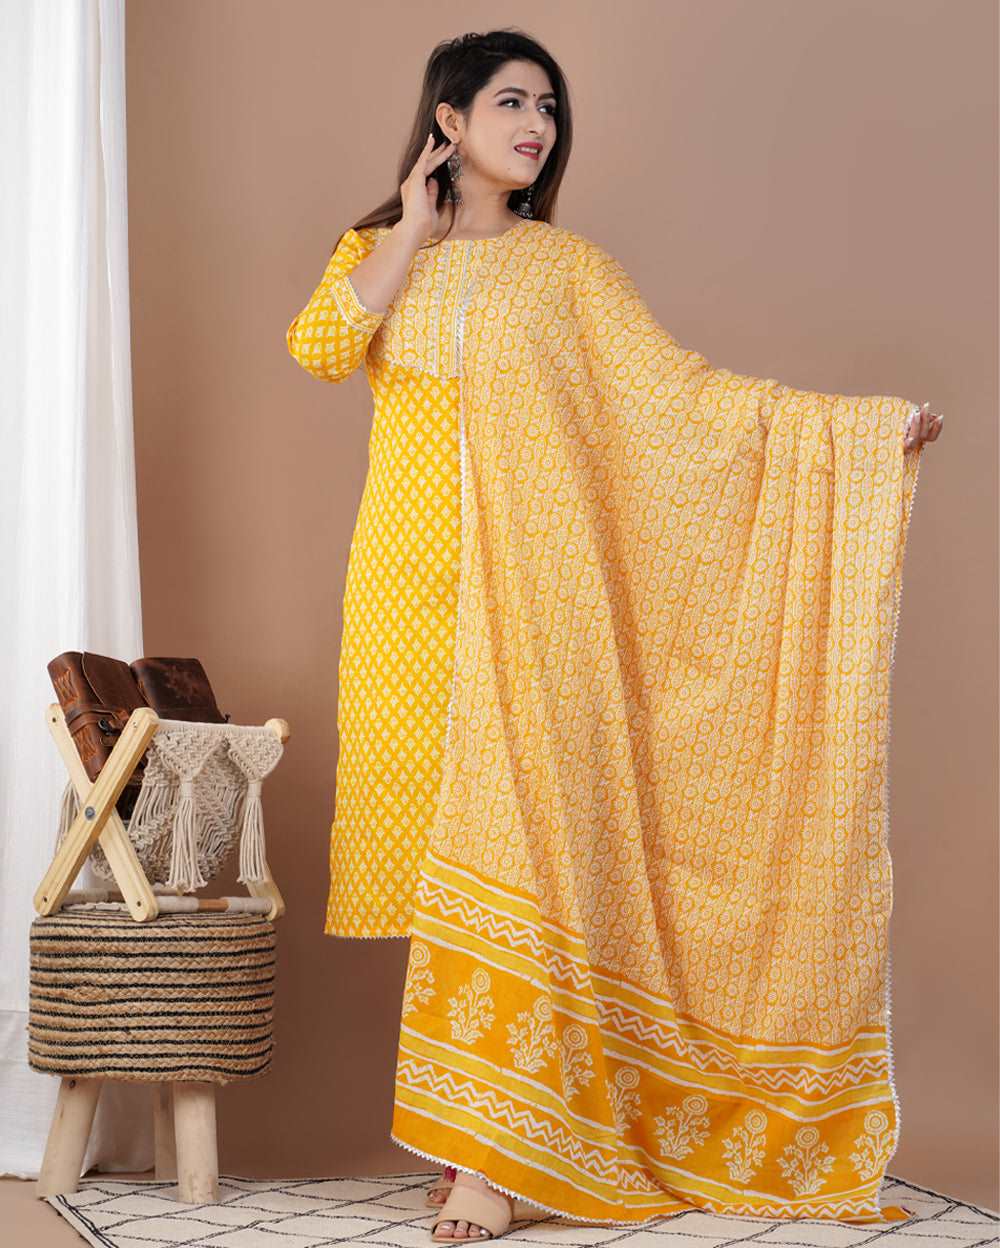 Lemon Yellow Floral Printed Cotton Suit Set With Gota Work On Neck and Dupatta